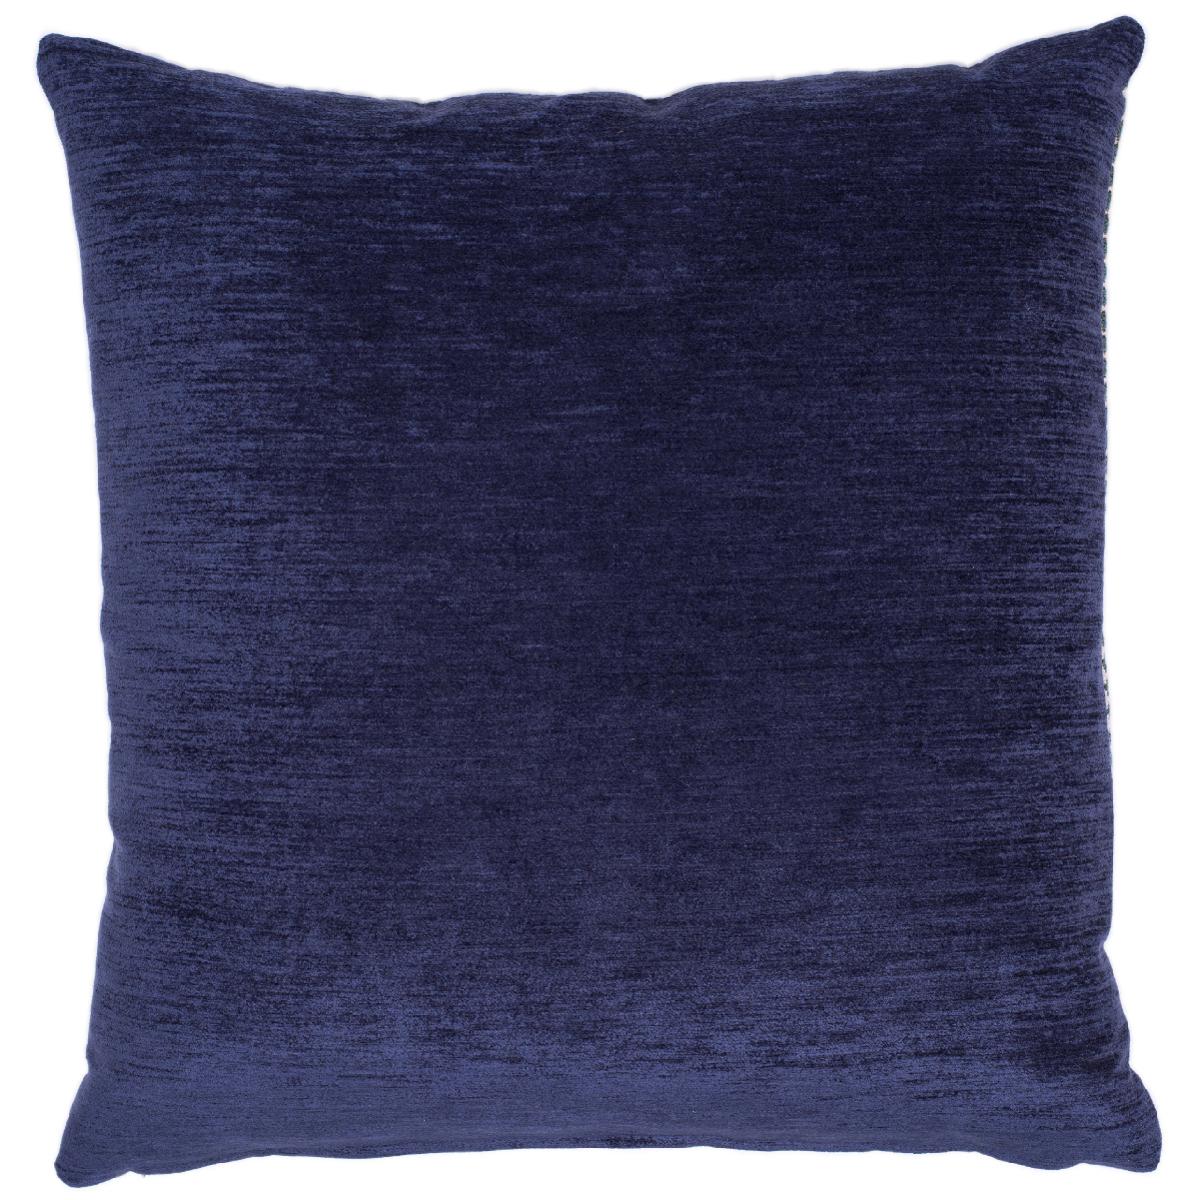 COLOUR: Blue with Gold Fringe
FRONT MATERIAL: 76% Viscose, 11% Polyester, 13% Cotton Jacquard woven fabric
BACK MATERIAL: Chenille 
FILLER: Feather
STOCK SIZE: 60cm x 60cm (approx)
ORIGIN: Fabric produced in Turkey, cushions made in the UK

Here at